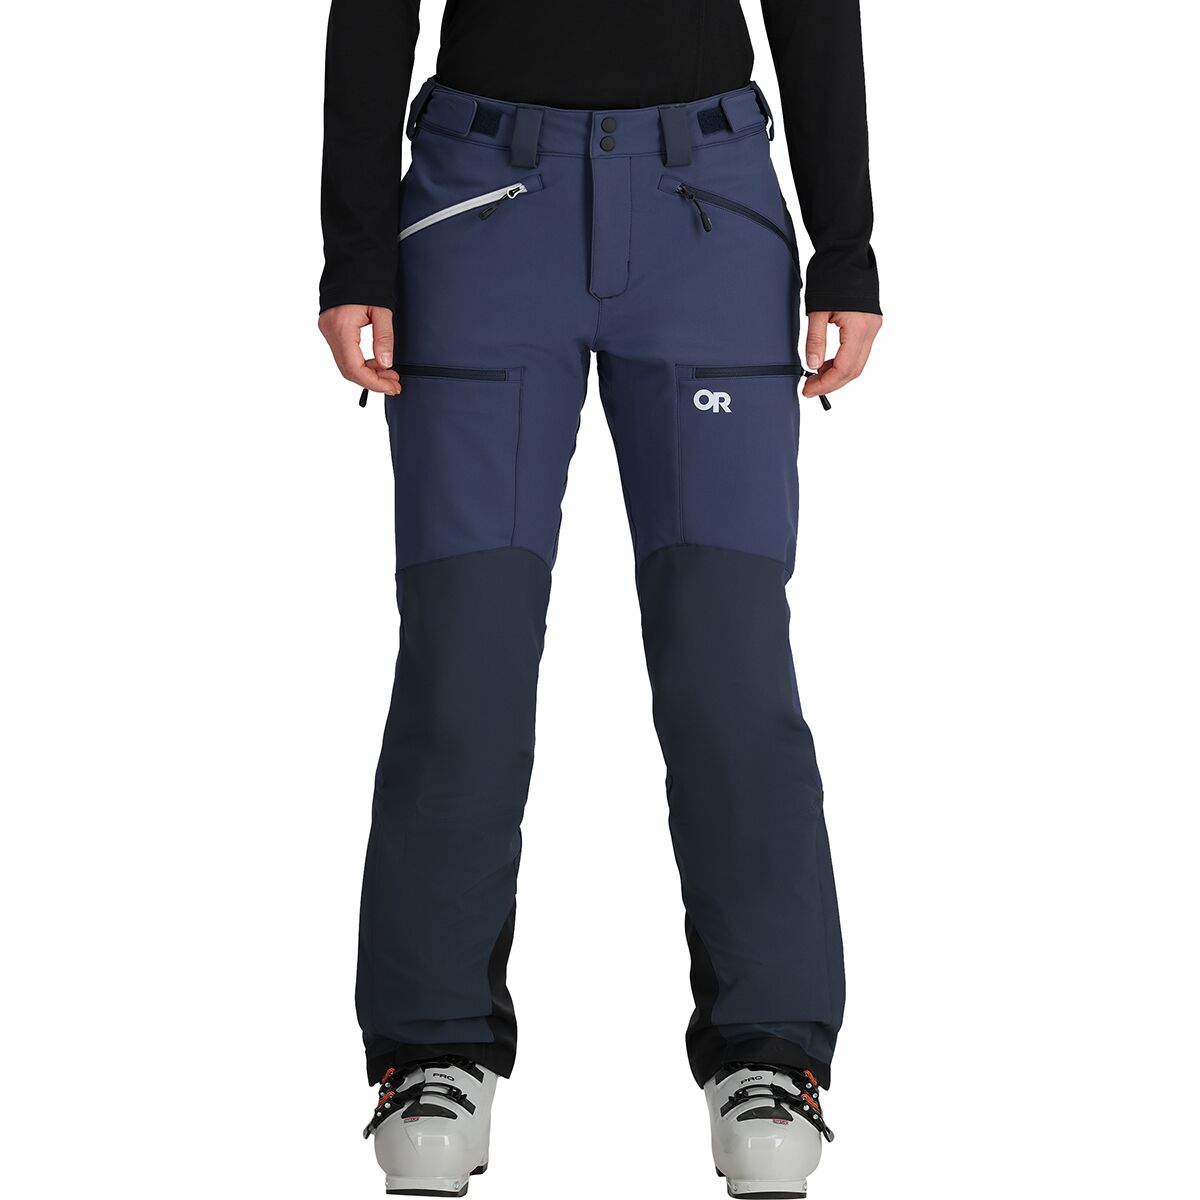 Outdoor Research Trailbreaker Tour Pant - Women's